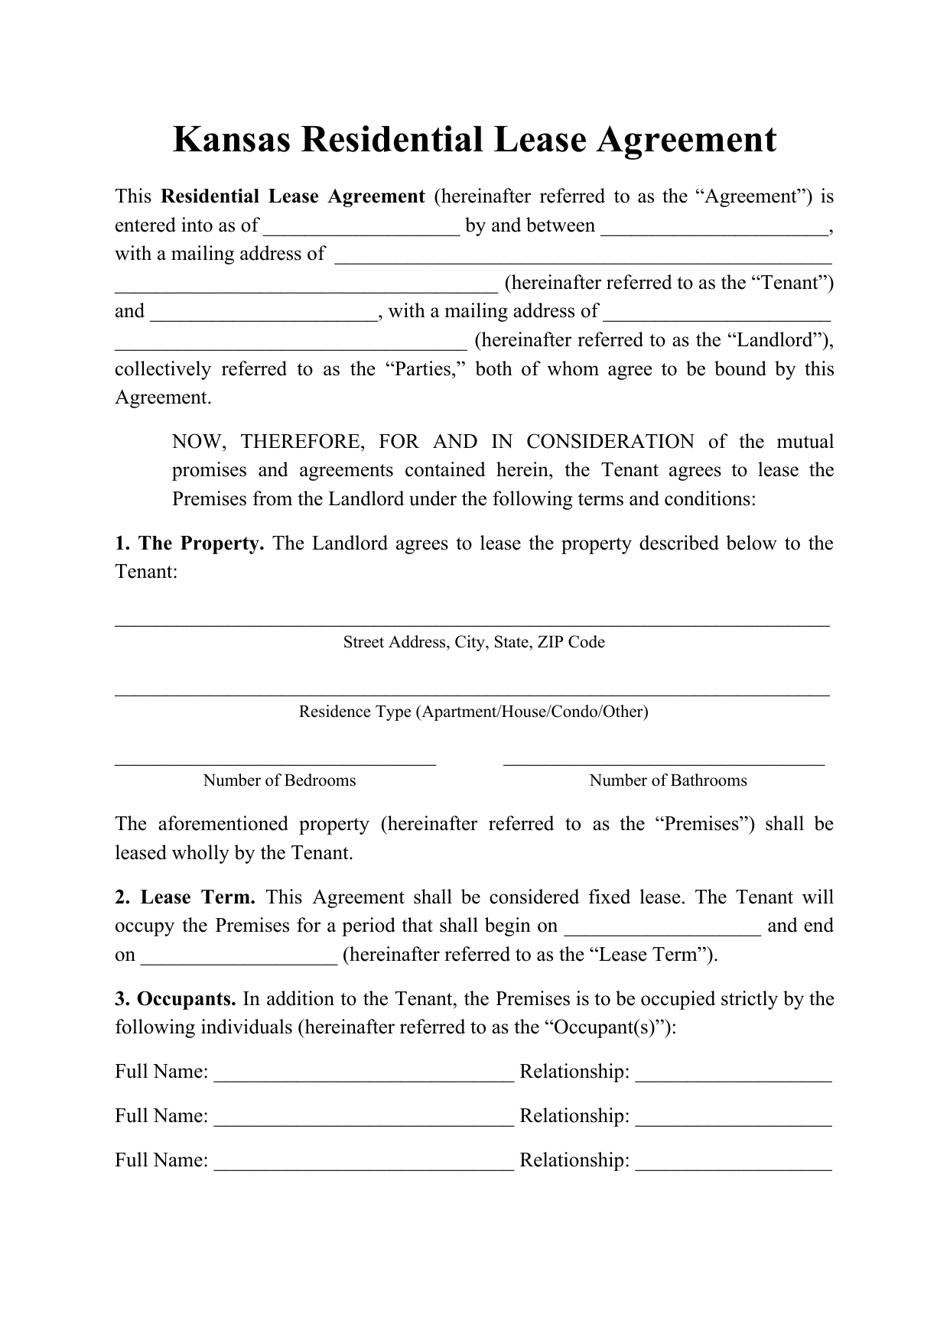 Kansas Residential Lease Agreement Template Fill Out Sign Online and